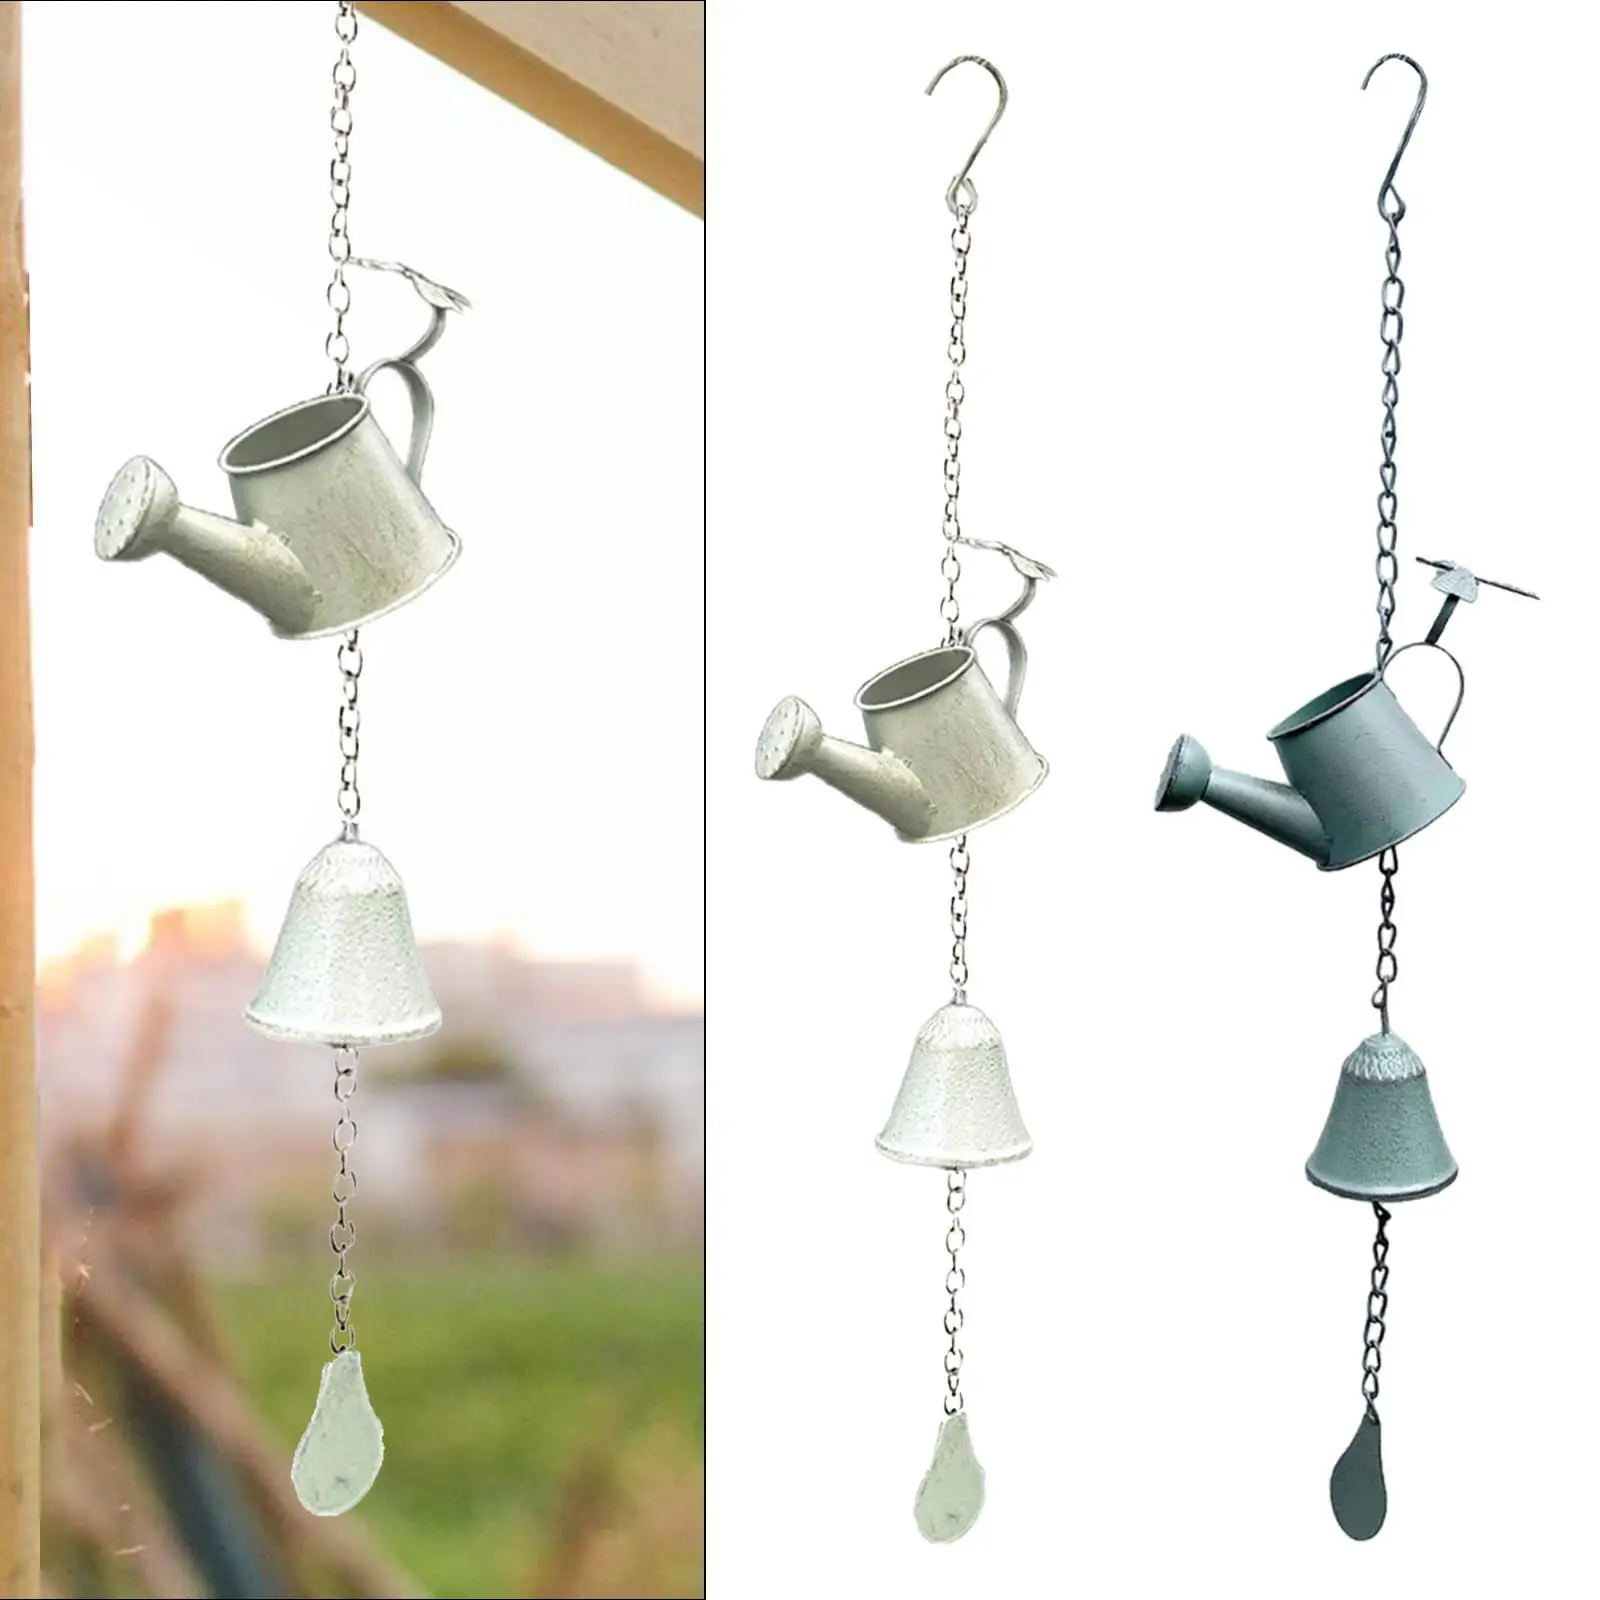 Watering Can Iron Wind Chime Vintage Metal Windchime for Yard Decor